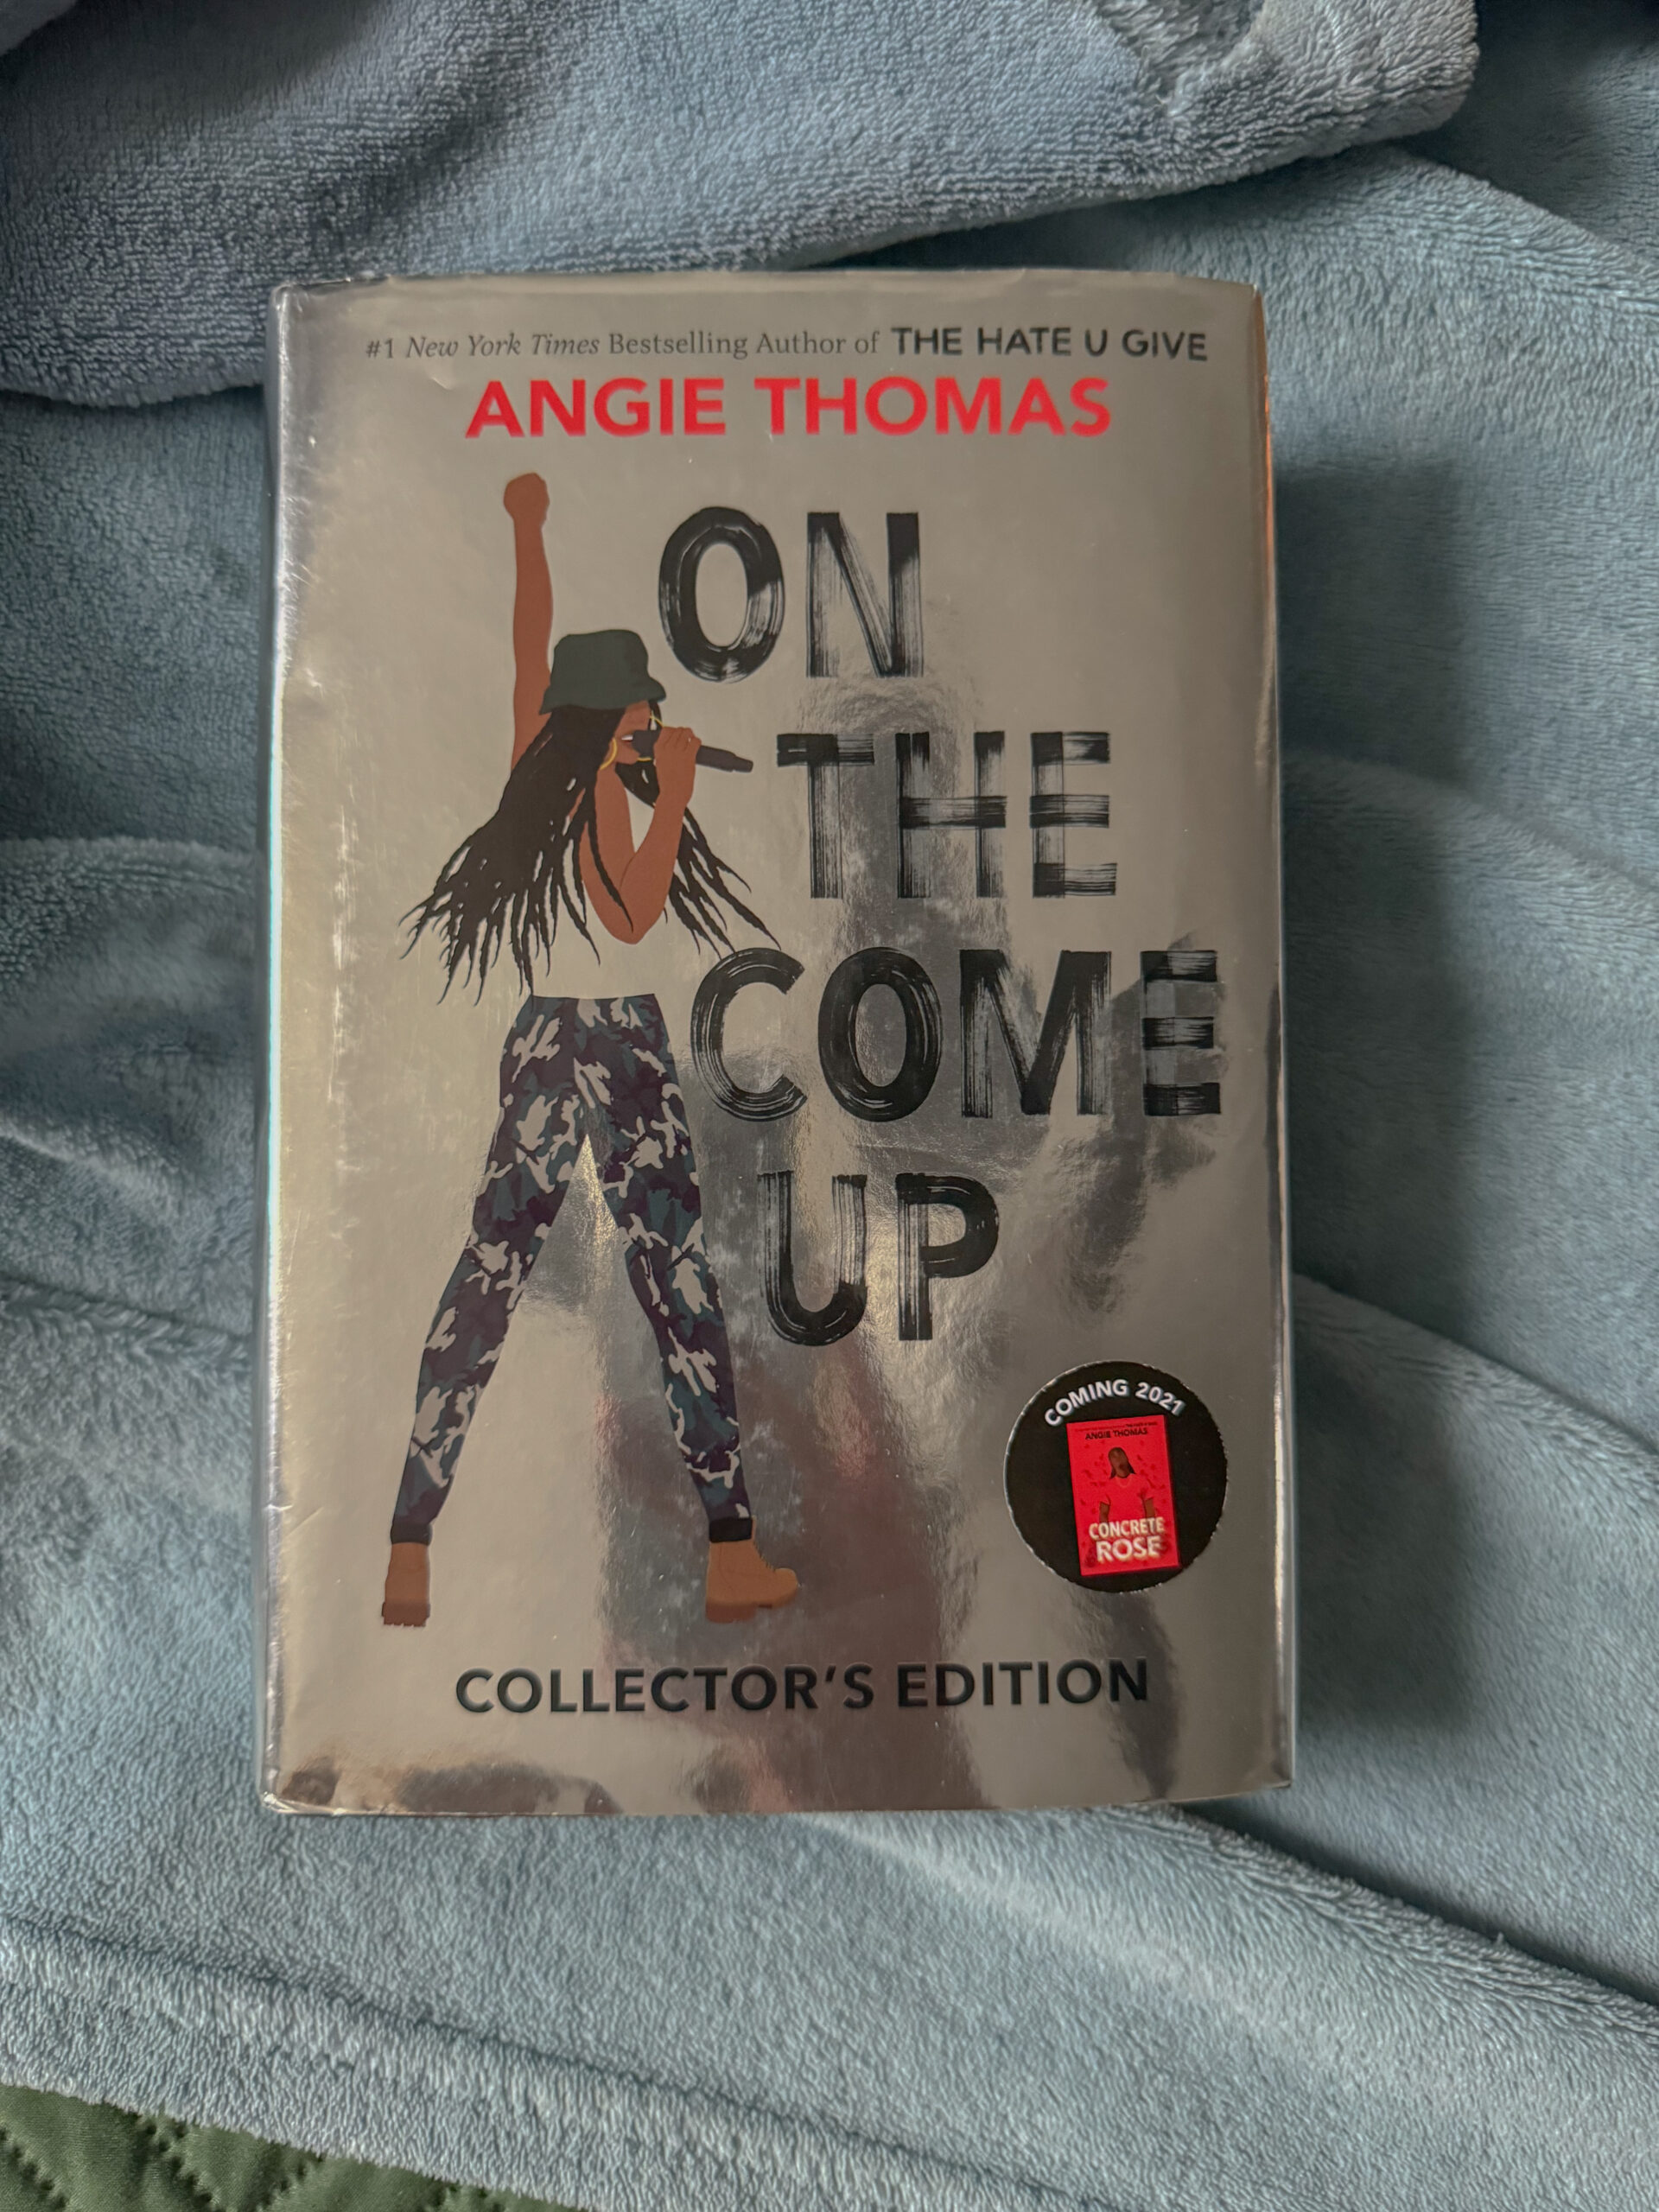 Angie Thomas' "On the Come Up" novel